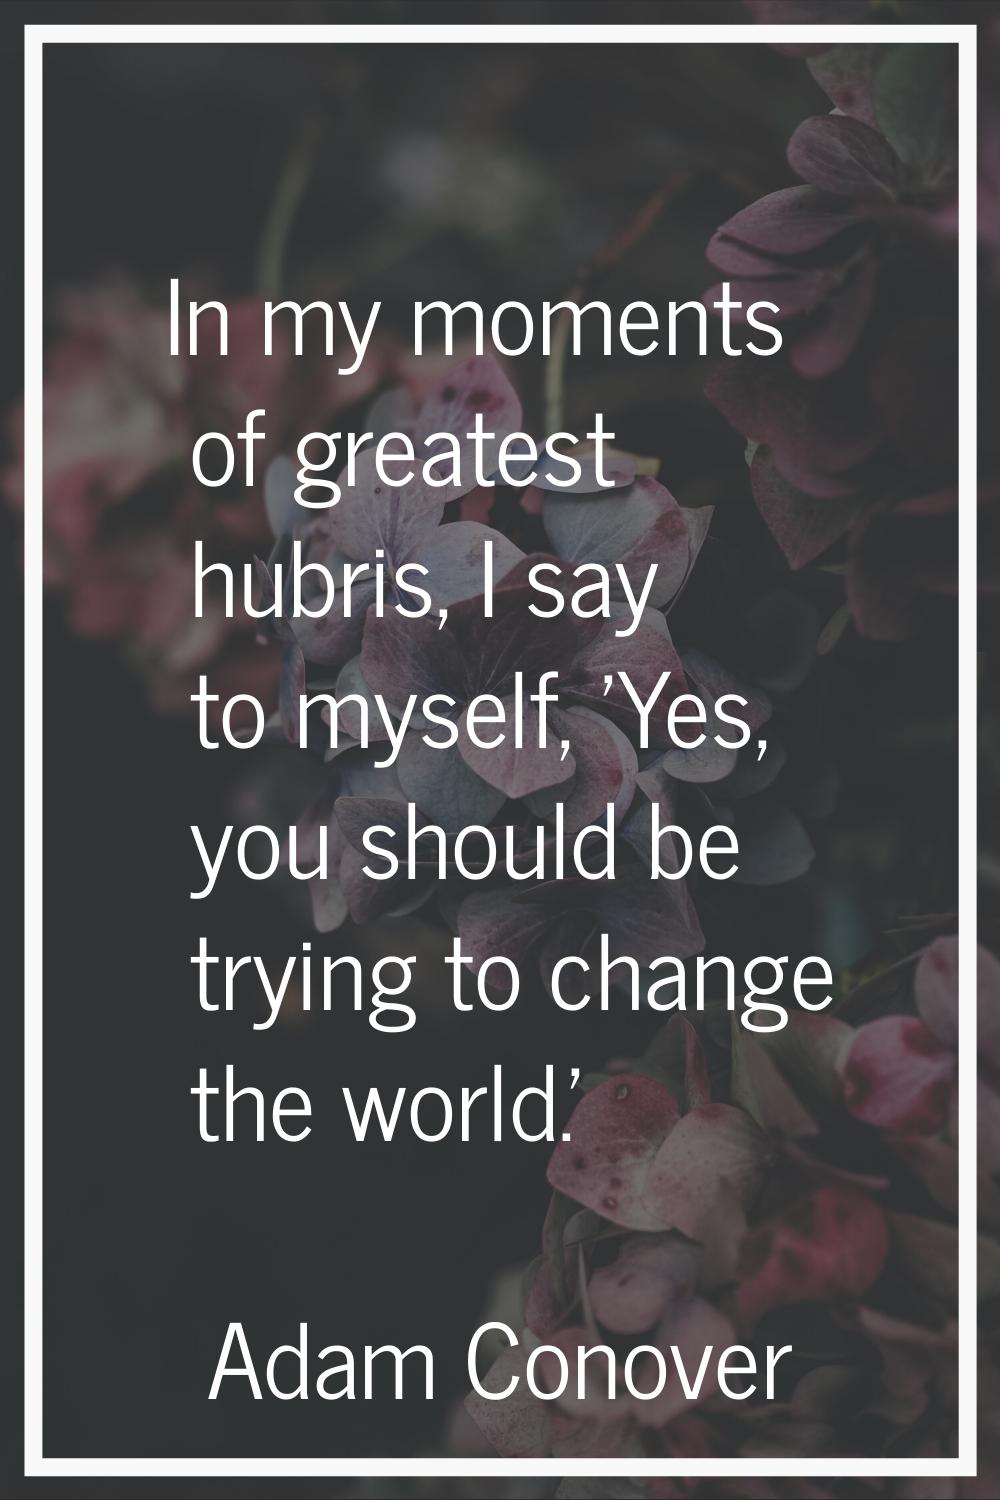 In my moments of greatest hubris, I say to myself, 'Yes, you should be trying to change the world.'